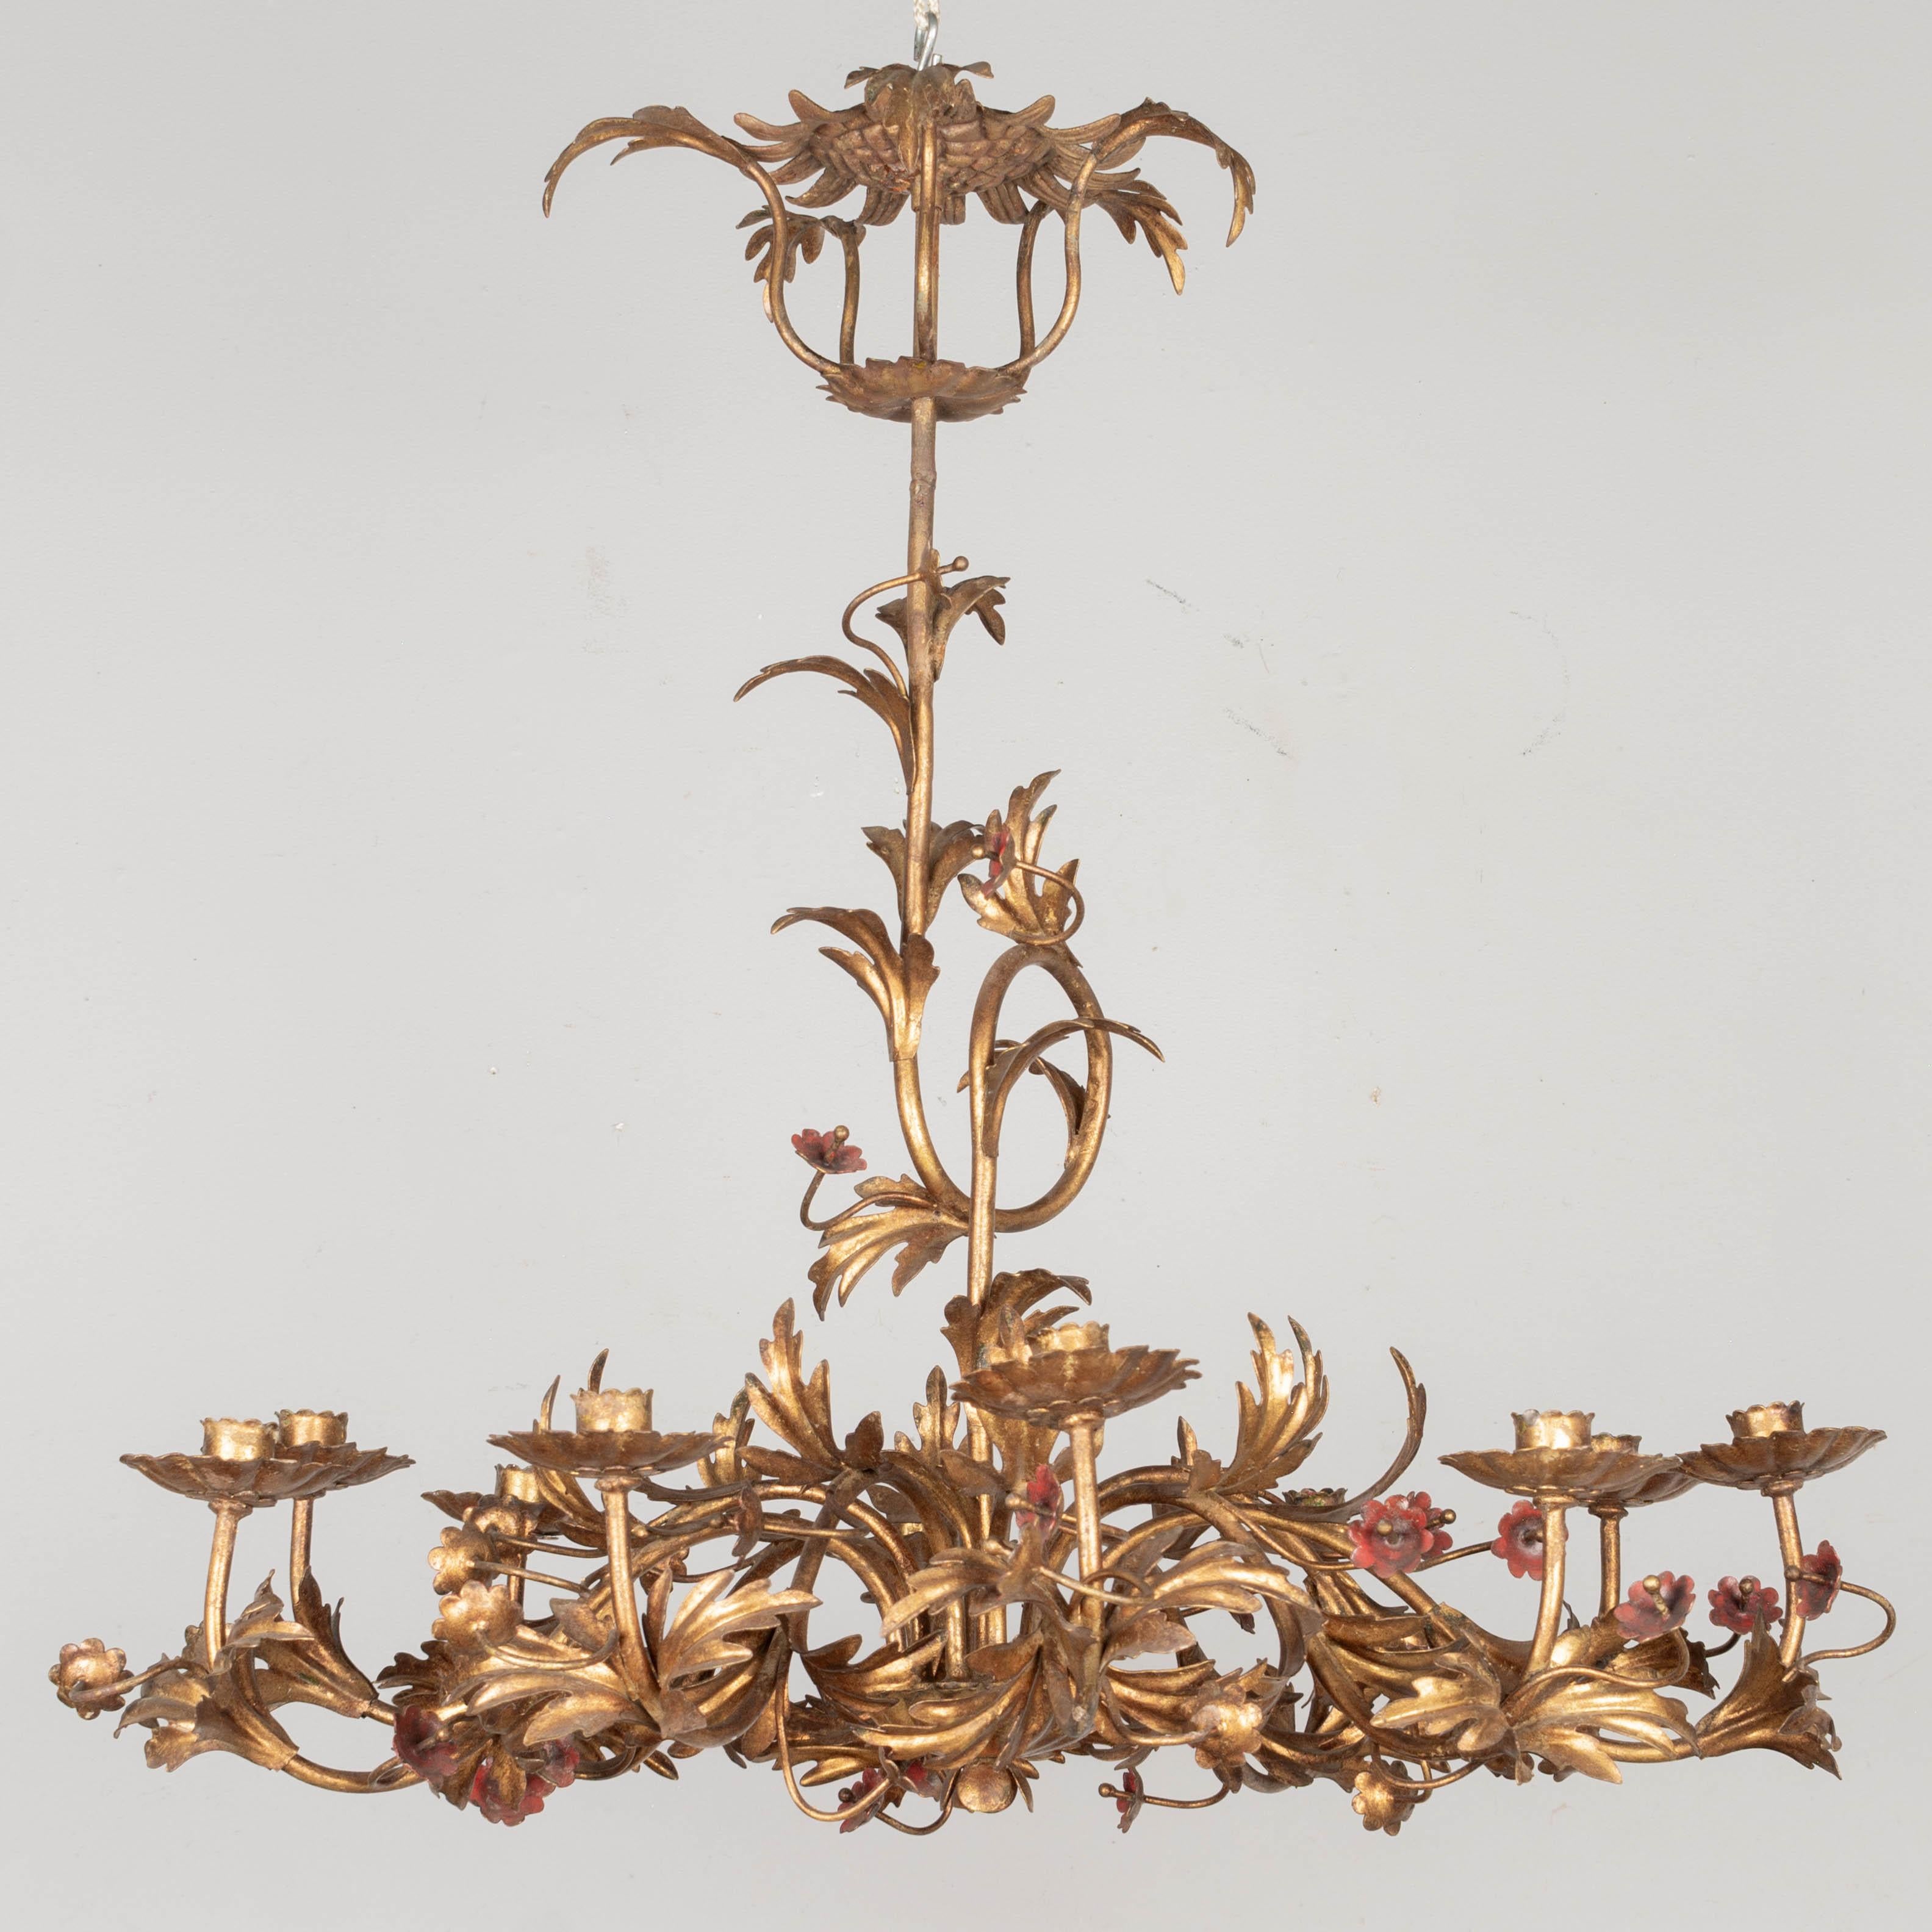 Hand-Painted 1950's Italian Gilt Tôle Candle Chandelier For Sale